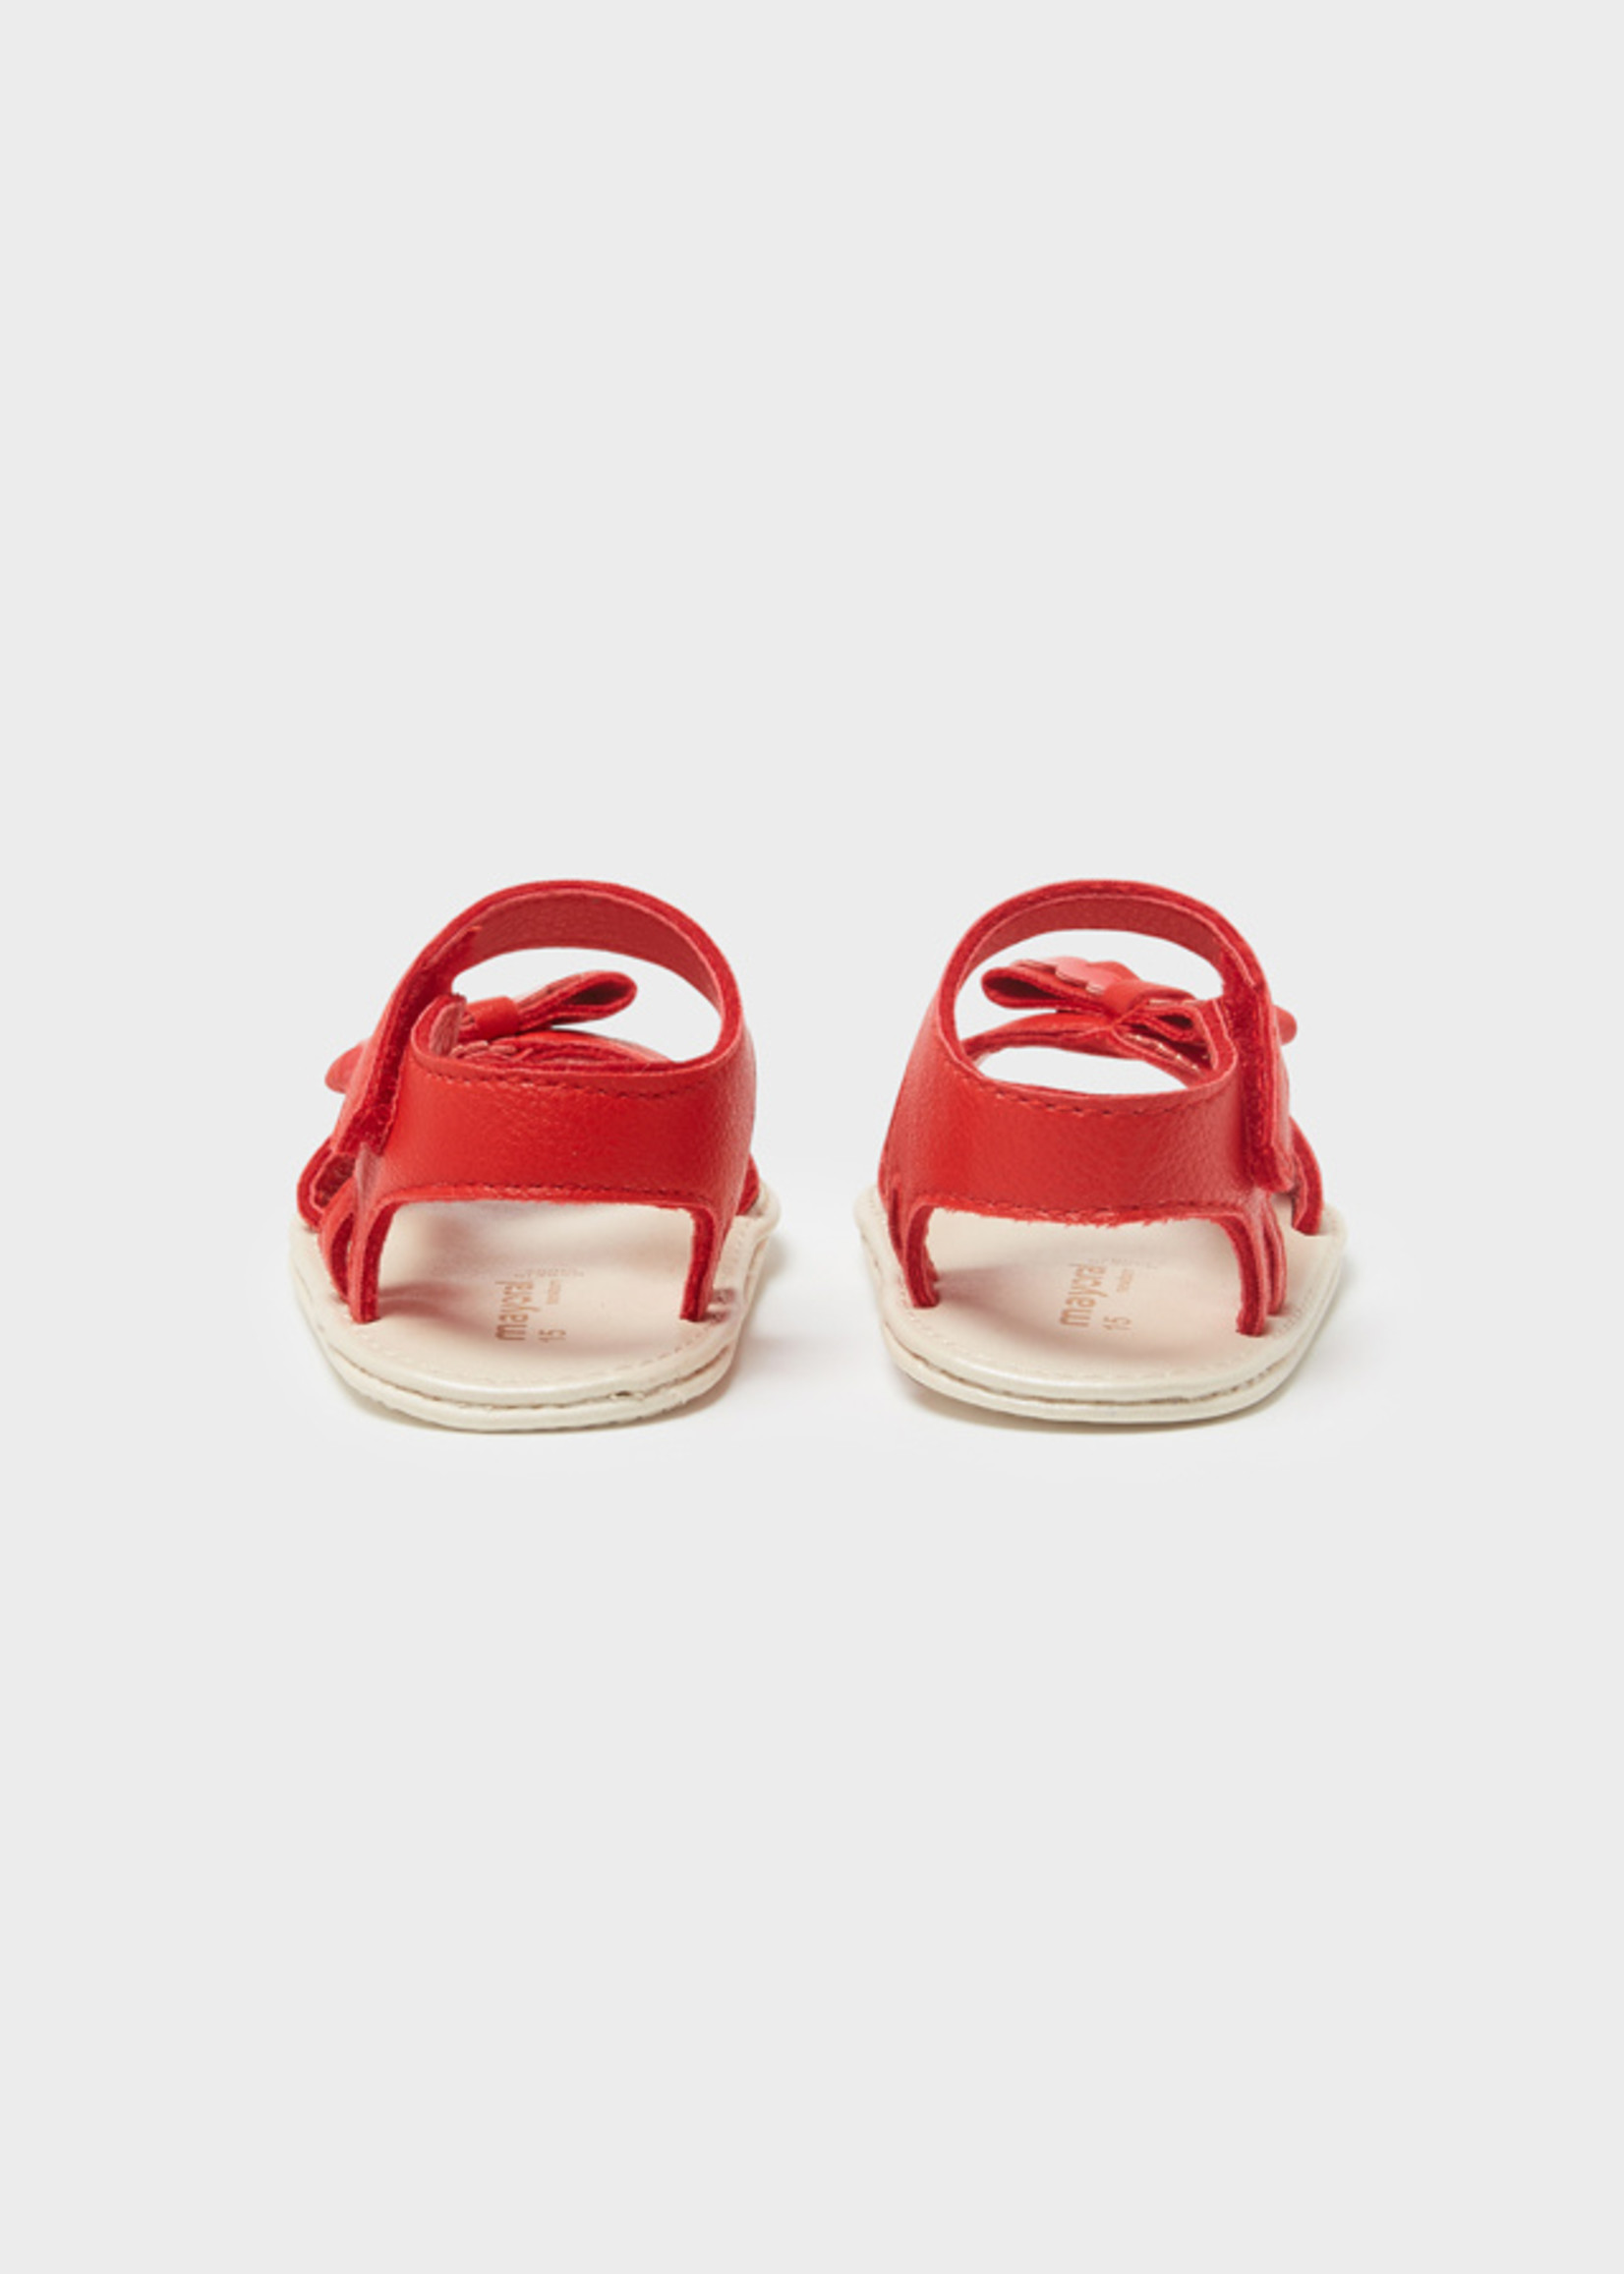 Mayoral Mayoral red Bow sandals